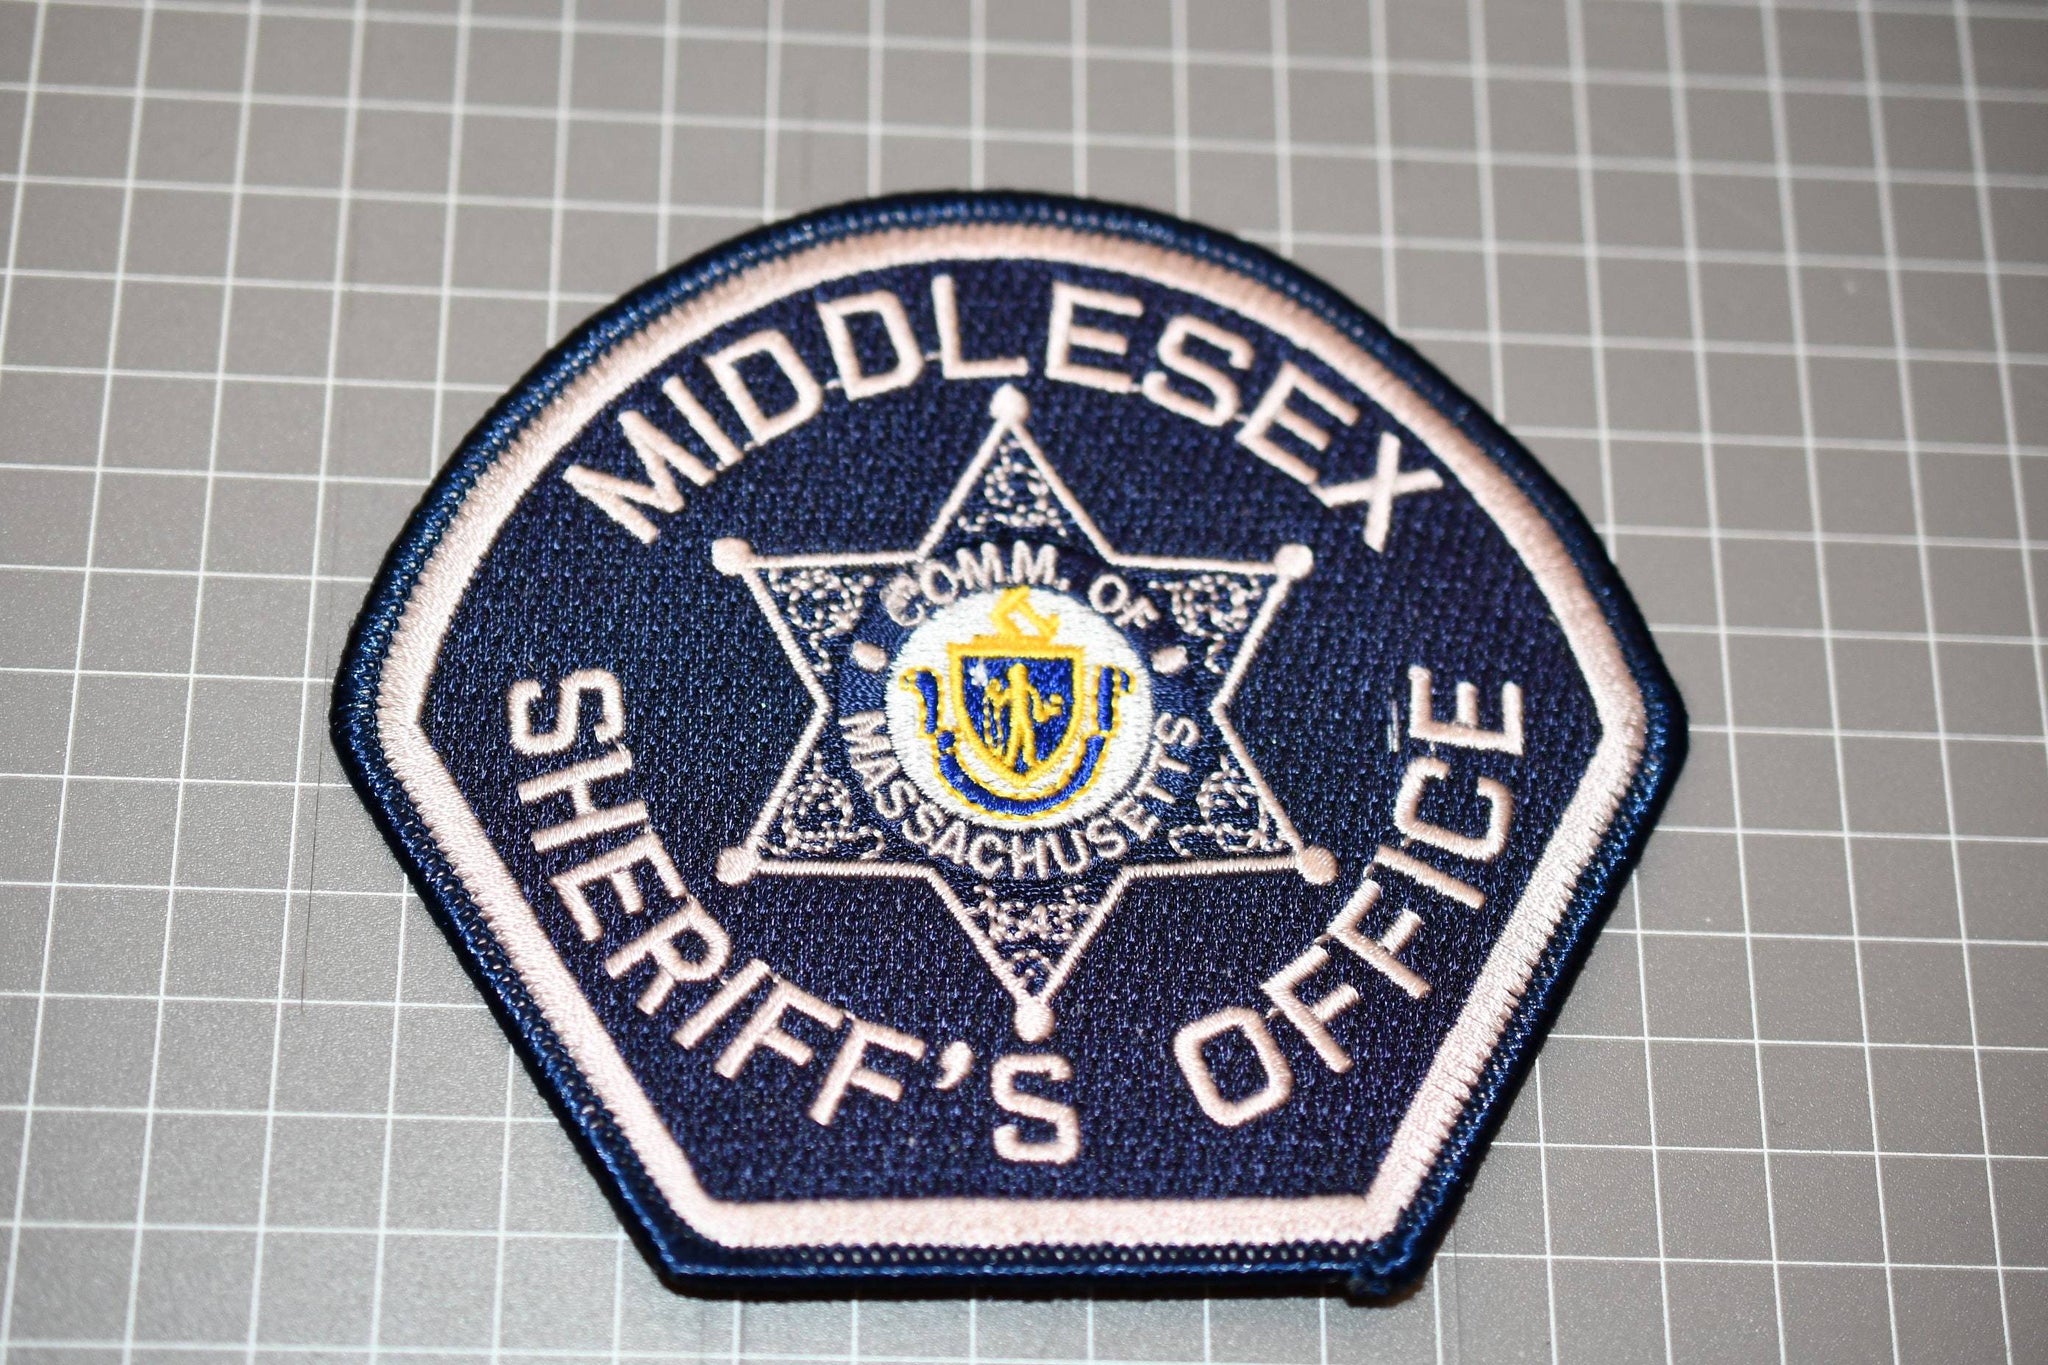 Middlesex Massachusetts Sheriff's Office Patch (B5)